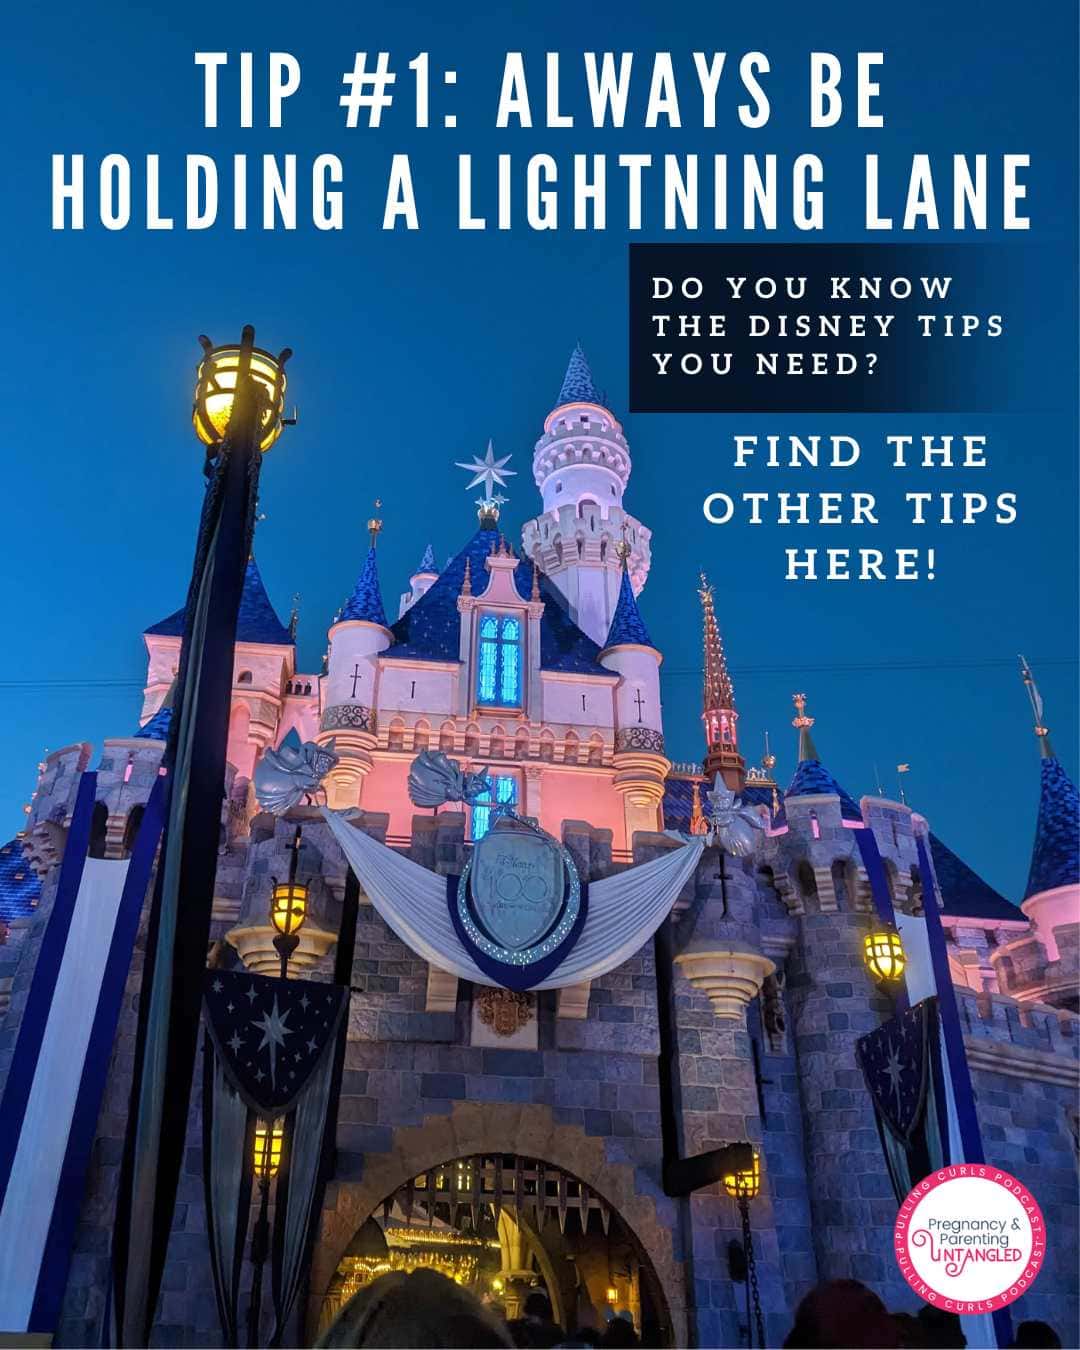 Get the best out of your Disneyland visit with these top Disney tips for families! Learn about the Genie plus and Lightning Lane systems to maximize your time at the park, especially during busy periods. Discover strategies for pre-purchasing Genie plus to access popular attractions without long waits, and find out how to prioritize rides and utilize the Lightning Lane system effectively. Listen in as Disney experts discuss the benefits of pre-planning, mealtime tips via @pullingcurls